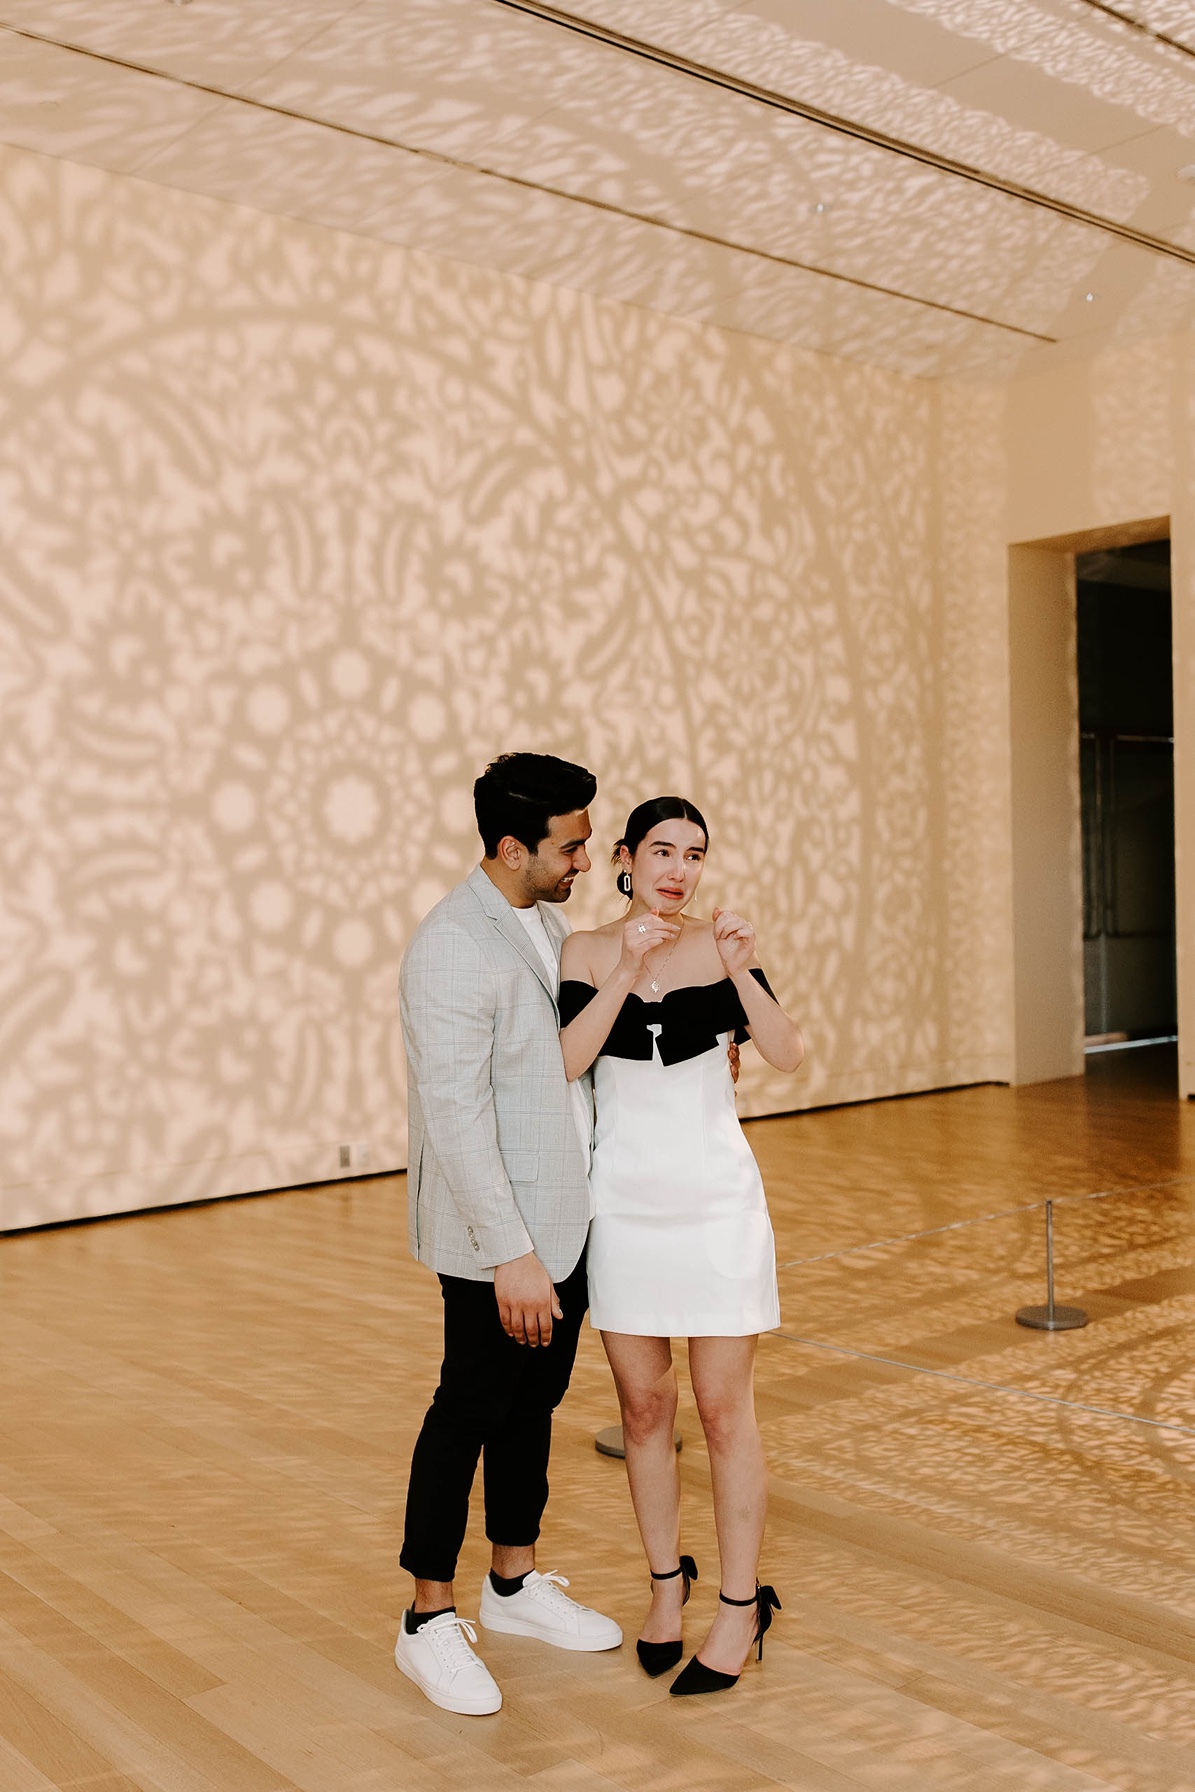 The bride was surprised at her Essex Peabody Museum proposal